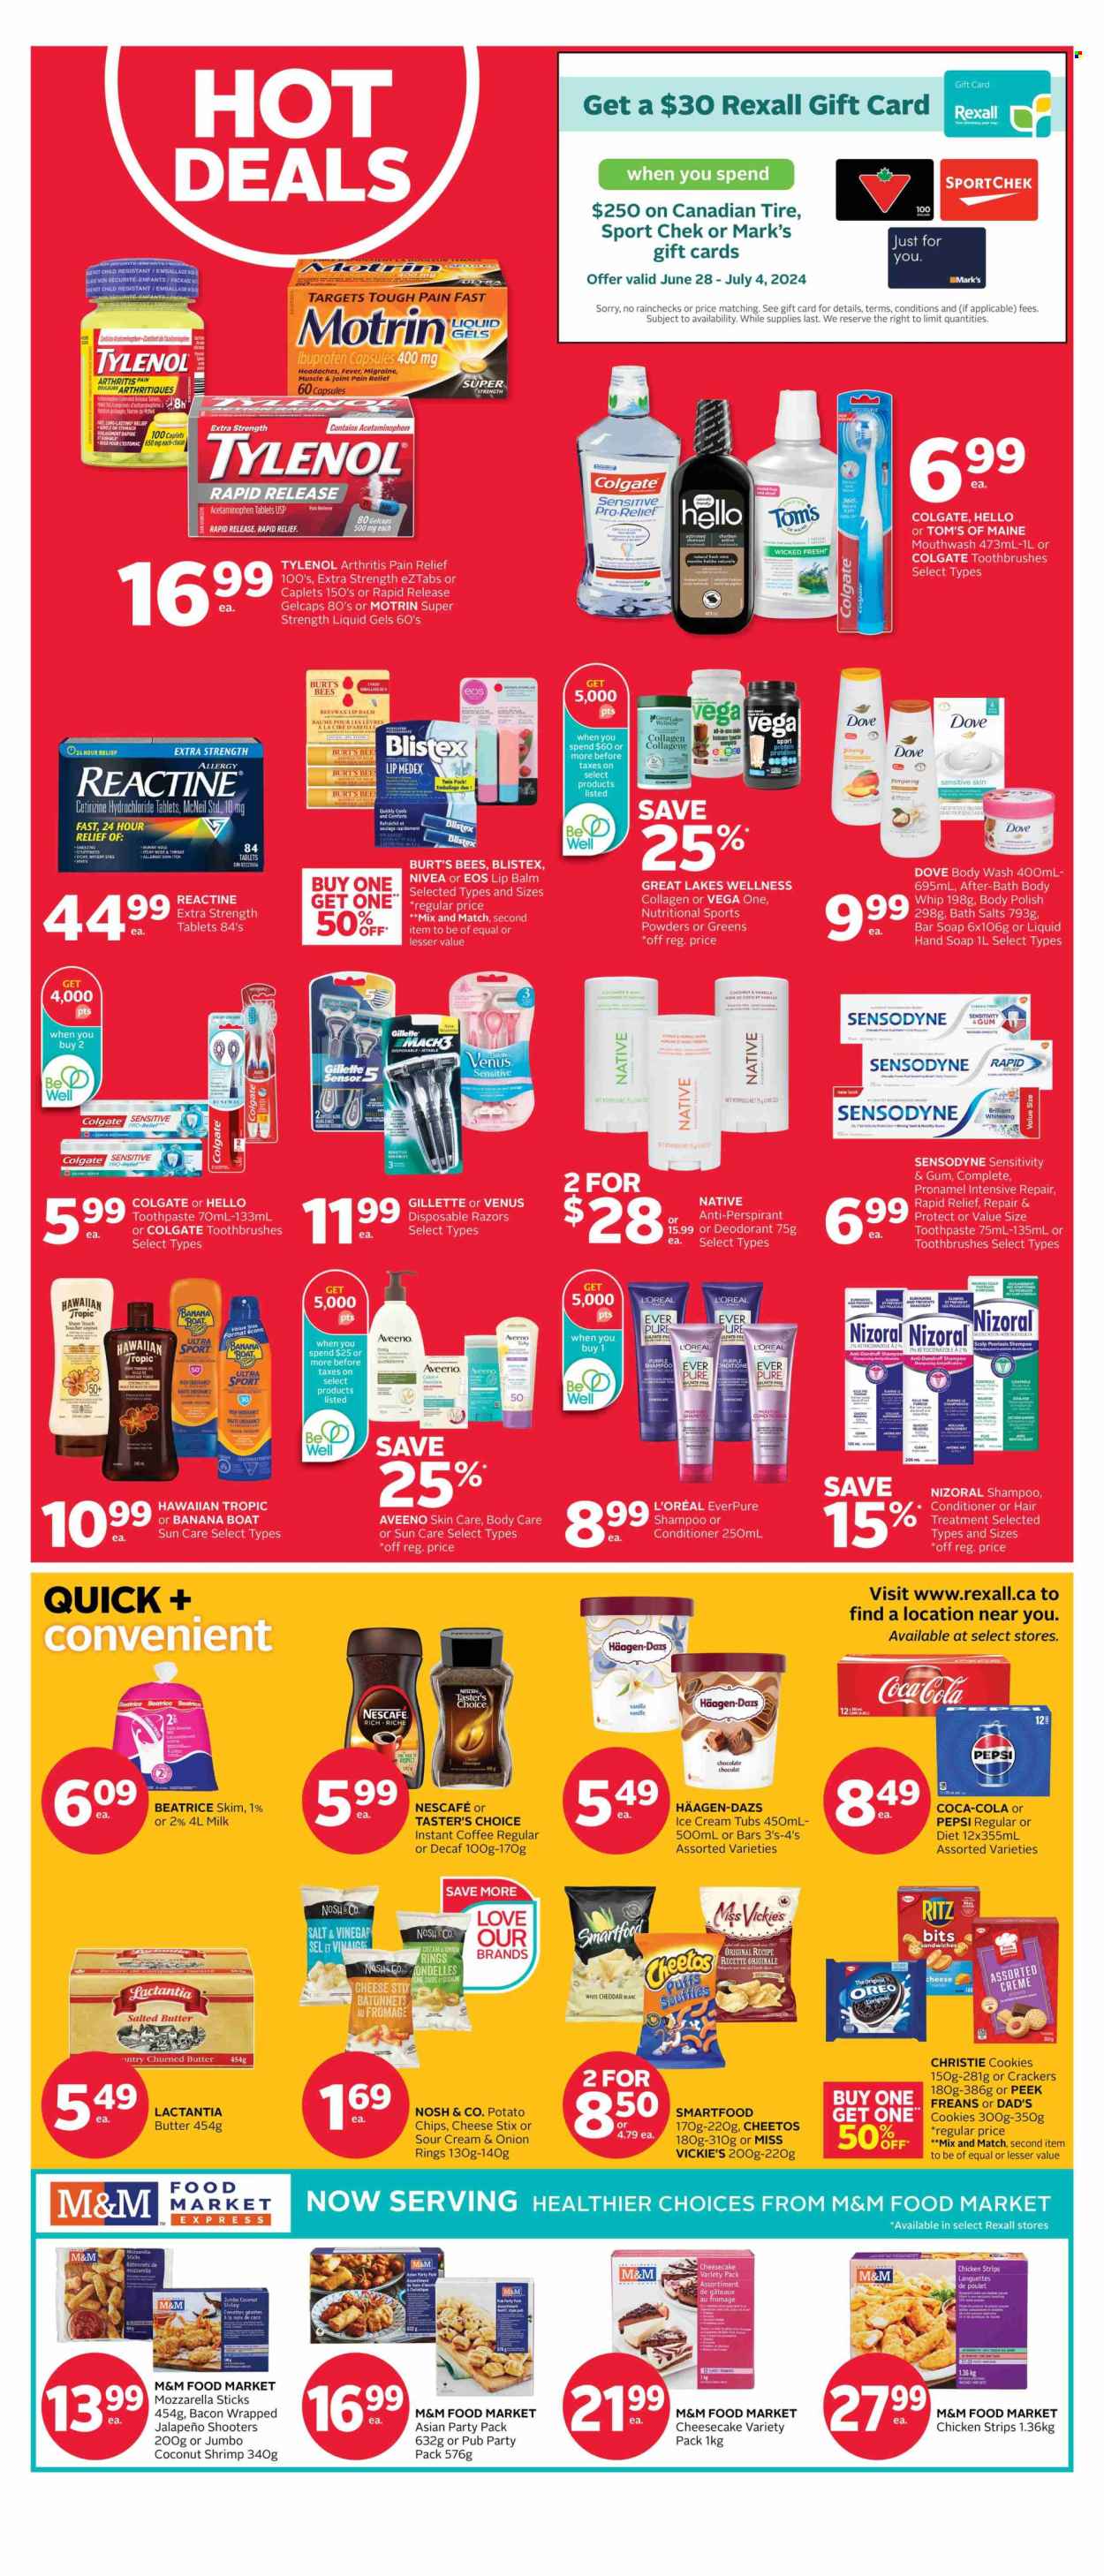 thumbnail - Rexall Flyer - June 28, 2024 - July 04, 2024 - Sales products - soufflés, puffs, Dove, ice cream, Oreo, Häagen-Dazs, onion rings, seafood, shrimps, strips, chicken strips, ready meal, M&M's, crackers, RITZ, Cheetos, Smartfood, salty snack, jalapeño, Coca-Cola, Pepsi, soft drink, carbonated soft drink, instant coffee, Nescafé, Aveeno, Nivea, bath product, body care, bath salt, body wash, shampoo, hand soap, soap bar, soap, Tom's of Maine, toothbrush, toothpaste, mouthwash, Gillette, L’Oréal, lip balm, sun care, skin care product, conditioner, body scrub, Hawaiian Tropic, anti-perspirant, Sure, deodorant, Venus, disposable razor, pain relief, Tylenol, Ibuprofen, activated charcoal, Motrin, allergy control, pain therapy, Colgate, Sensodyne. Page 2.